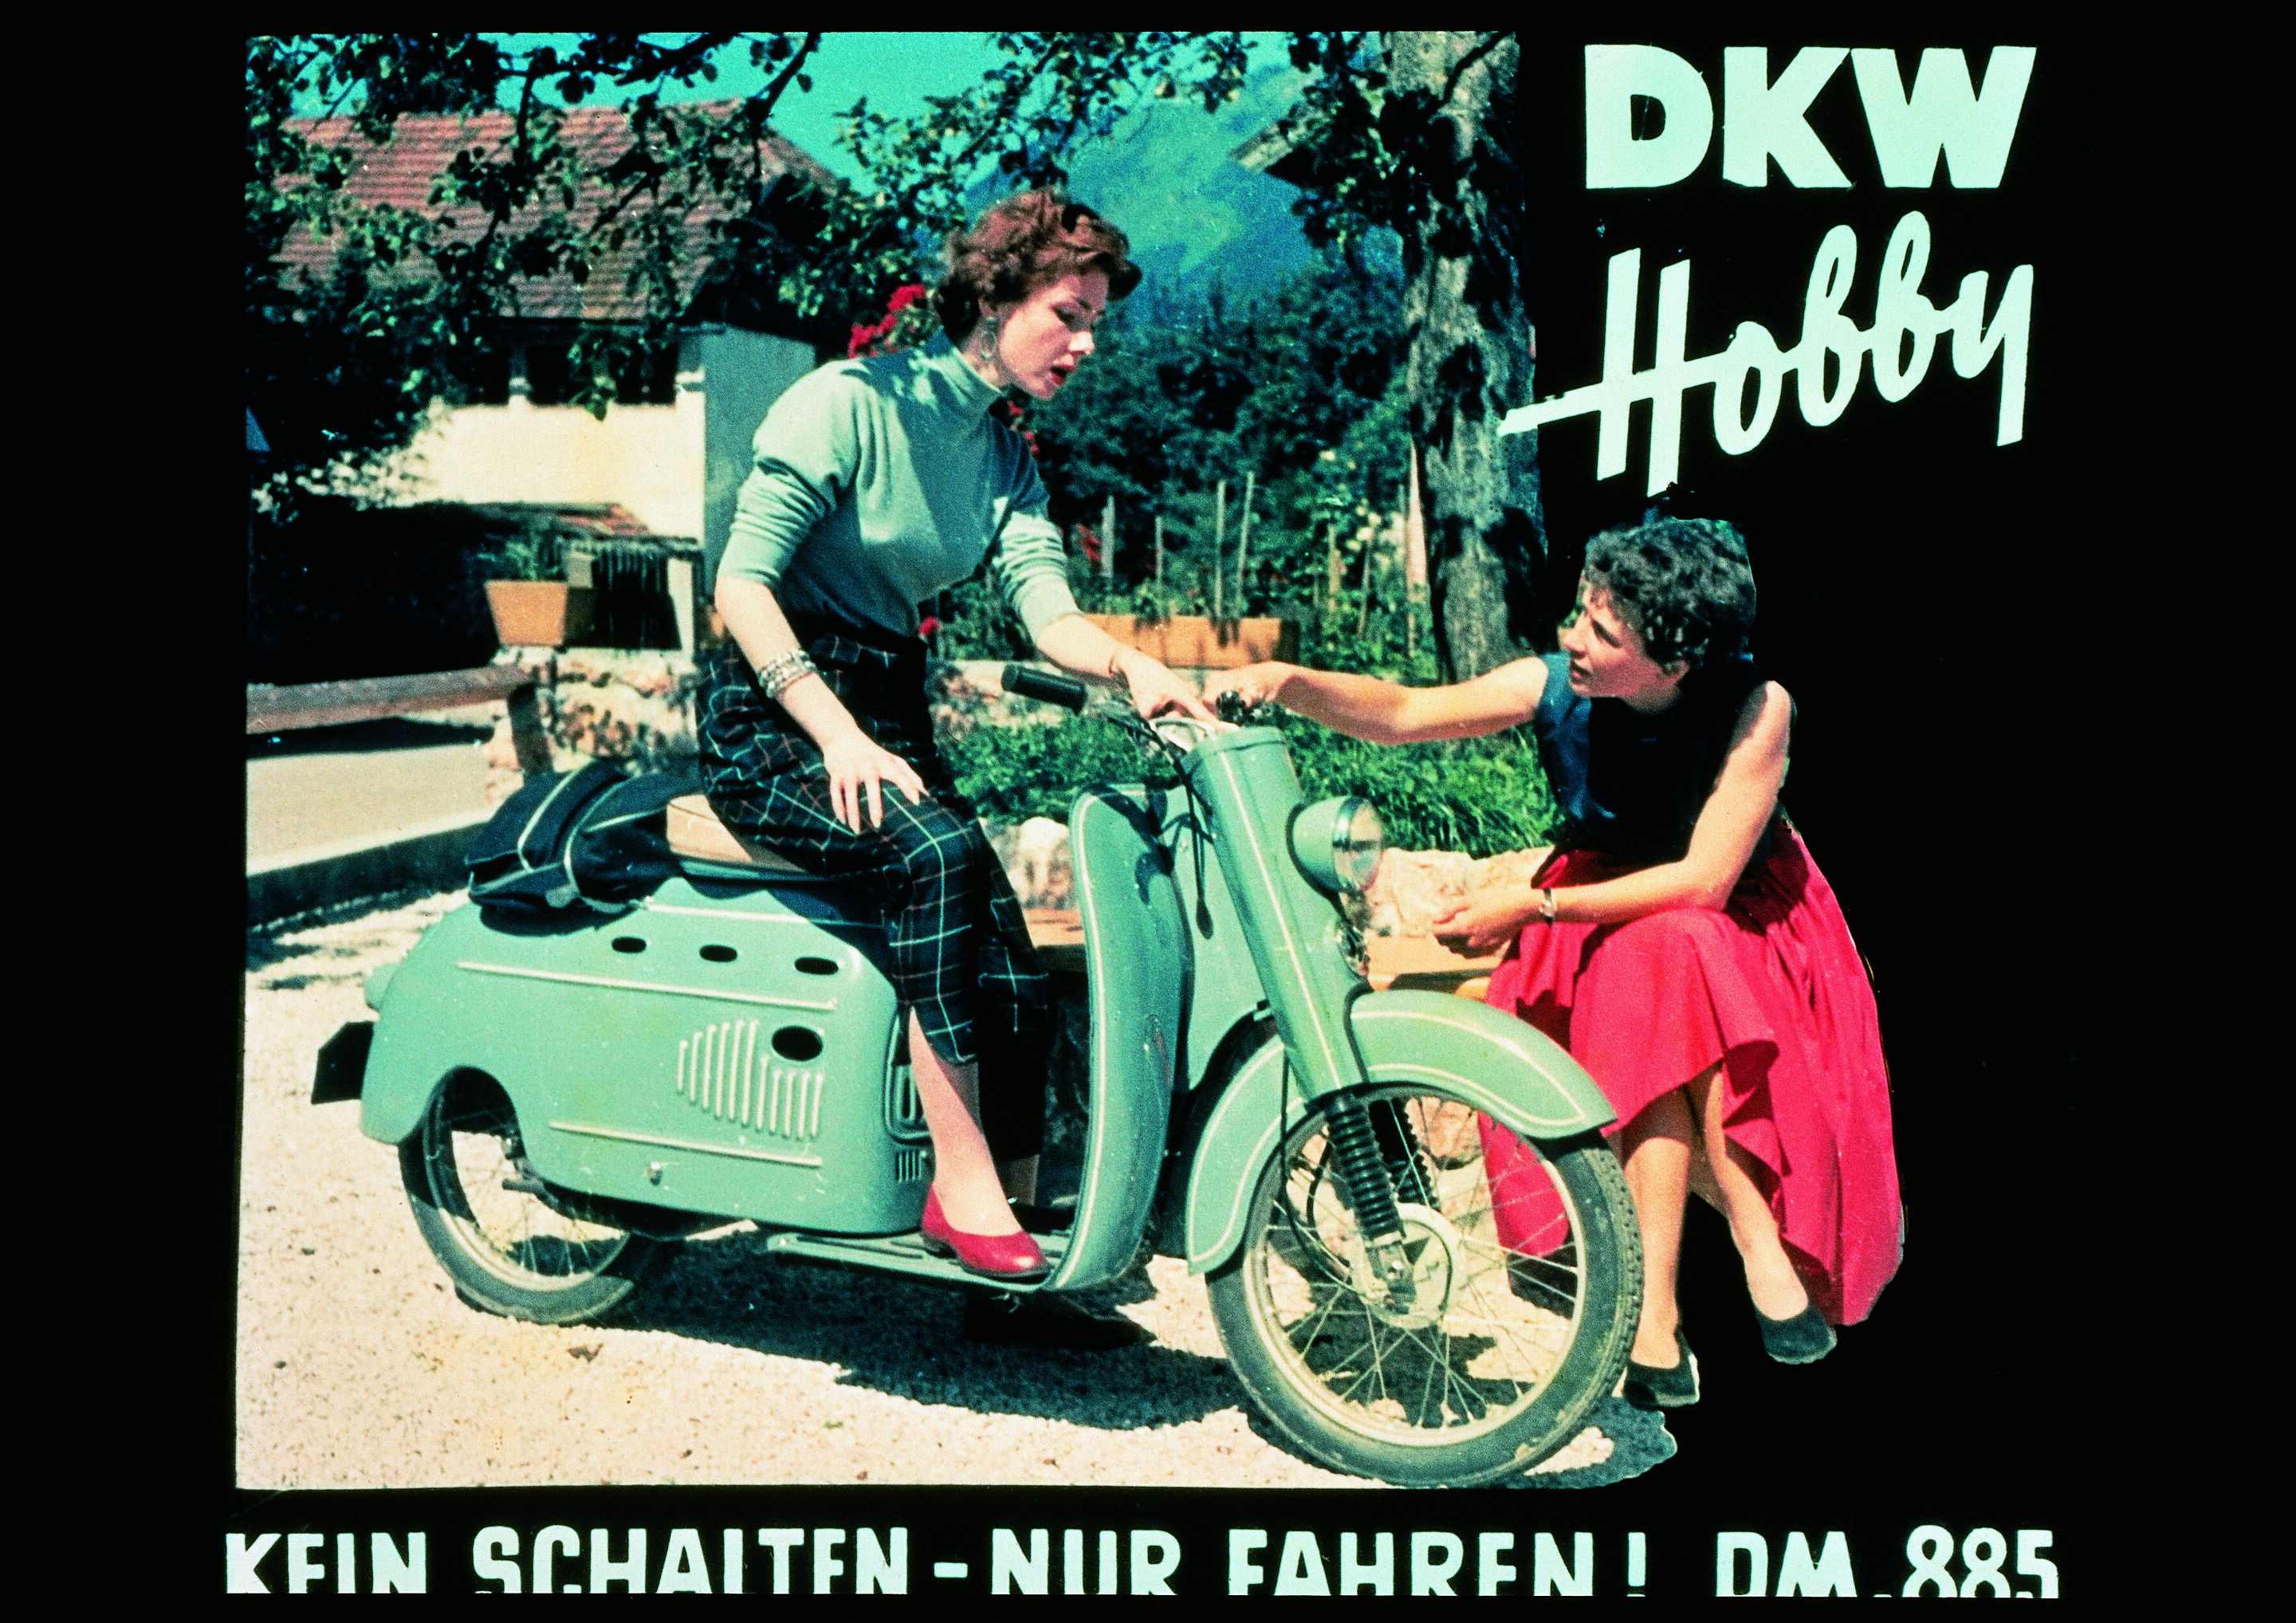 DKW Hobby scooter, 74 ccm, 3 bhp, one-cylinder two stroke engine, top speed 60 km/h, Uher automatic transmission